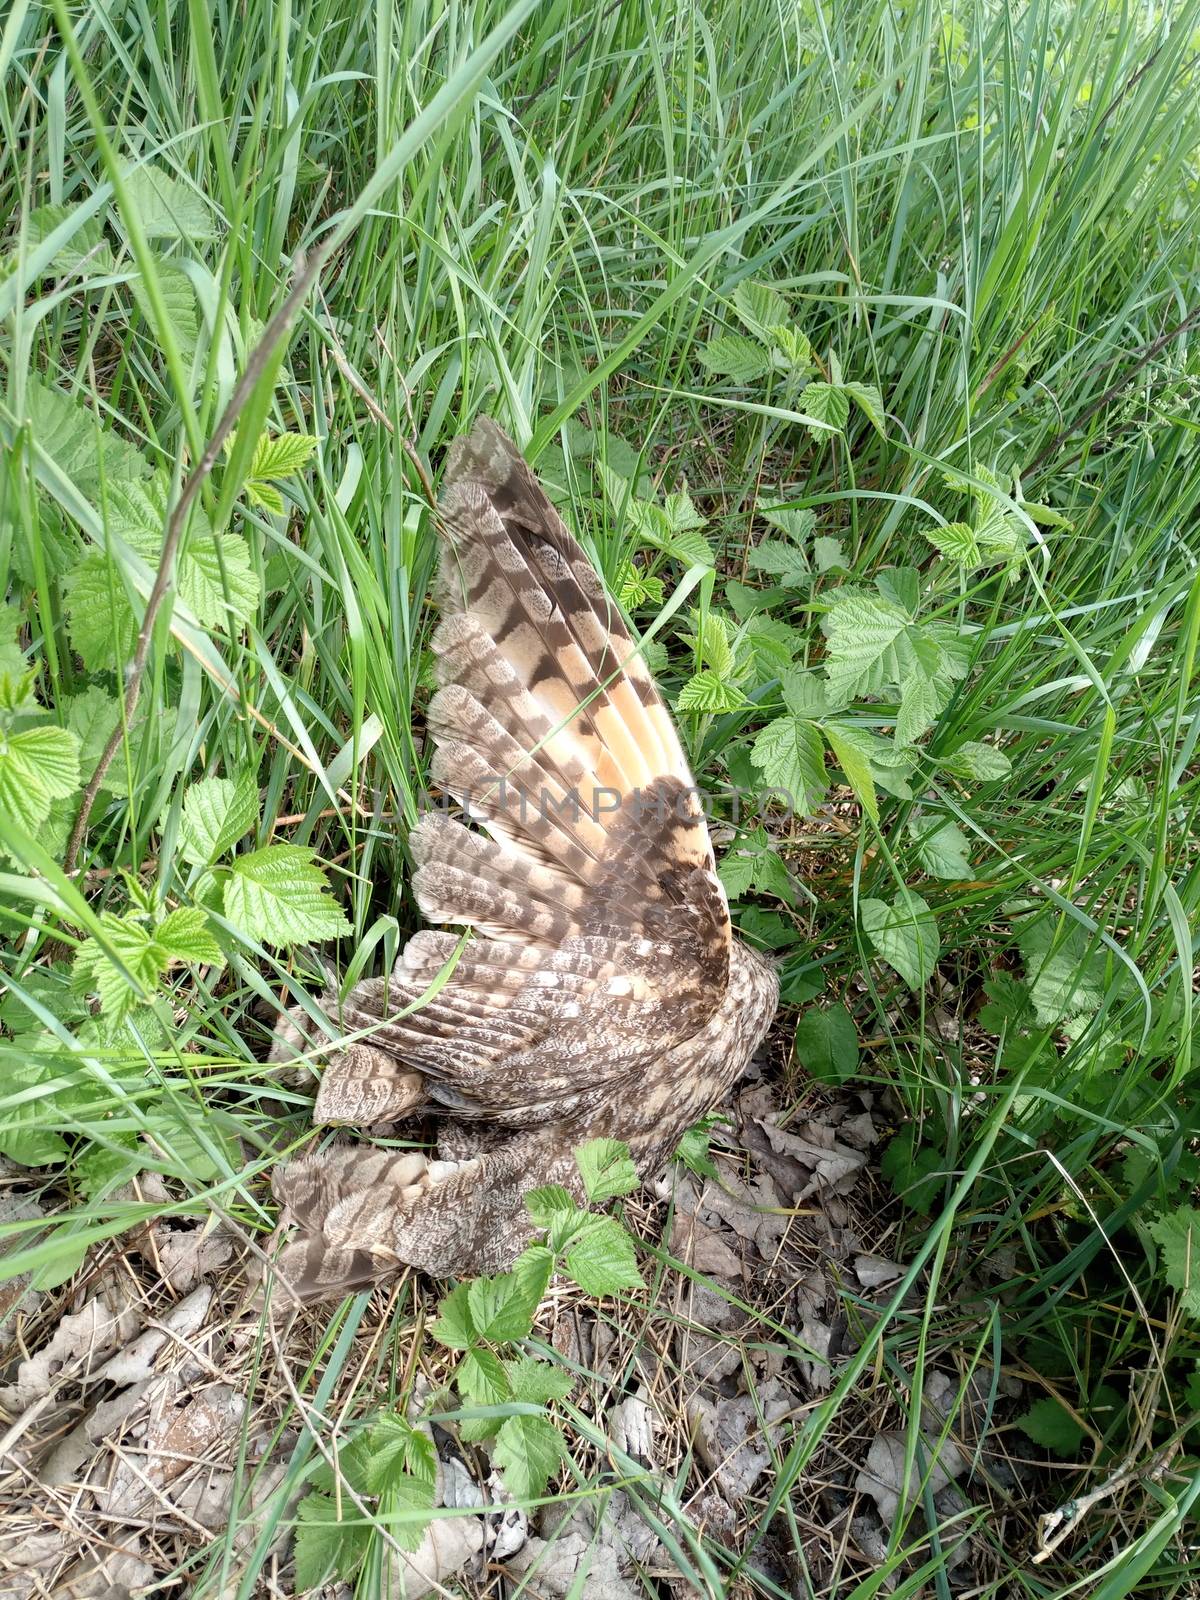 Dead owl. Found a dead owl in the grass.